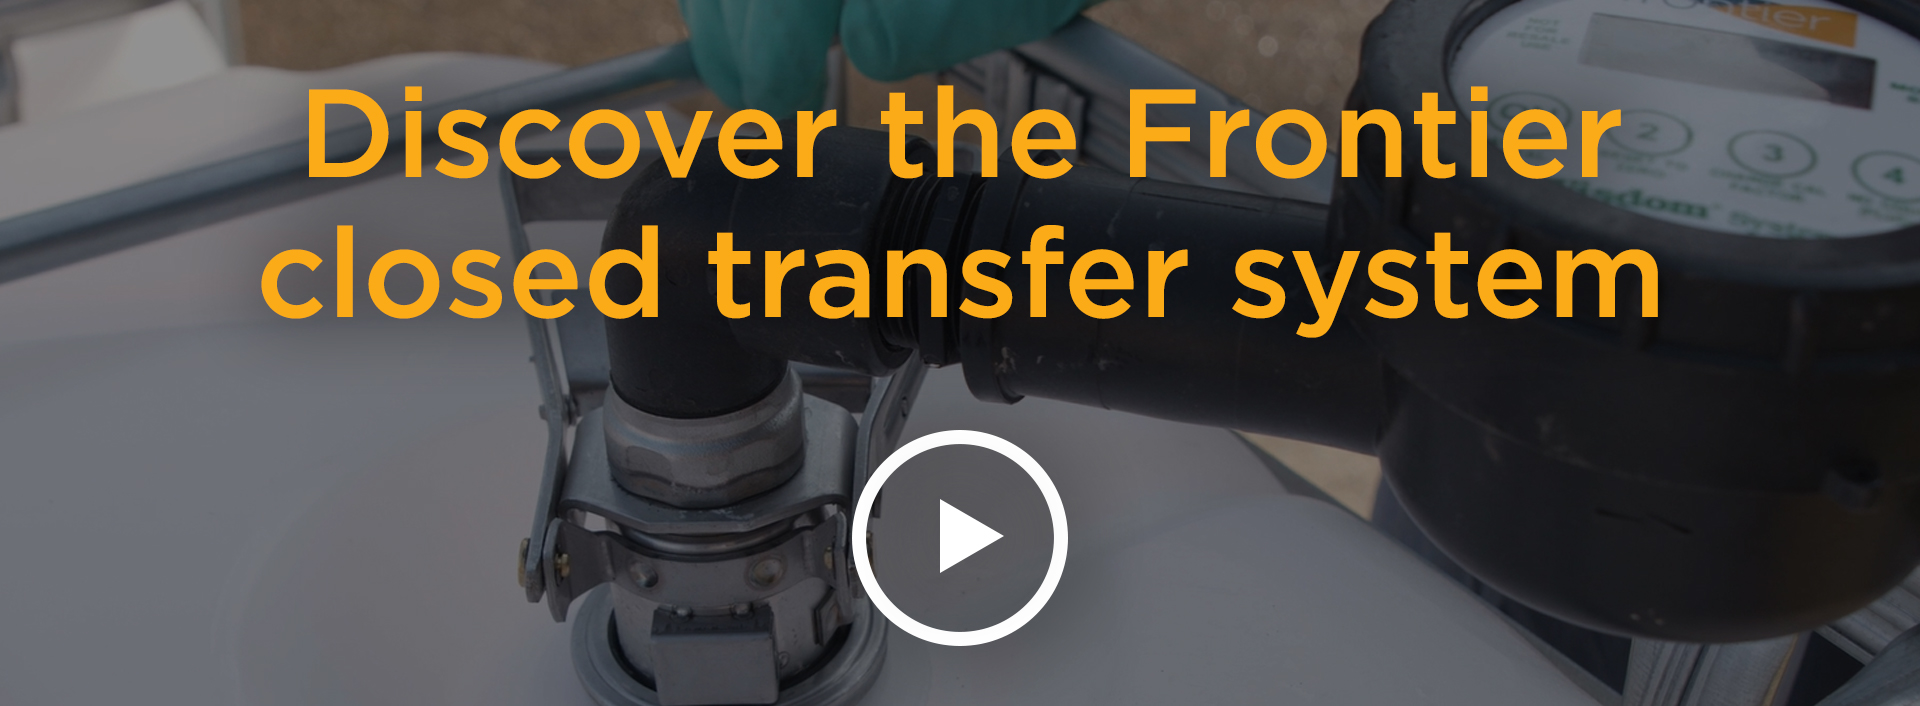 Frontier closed transfer system